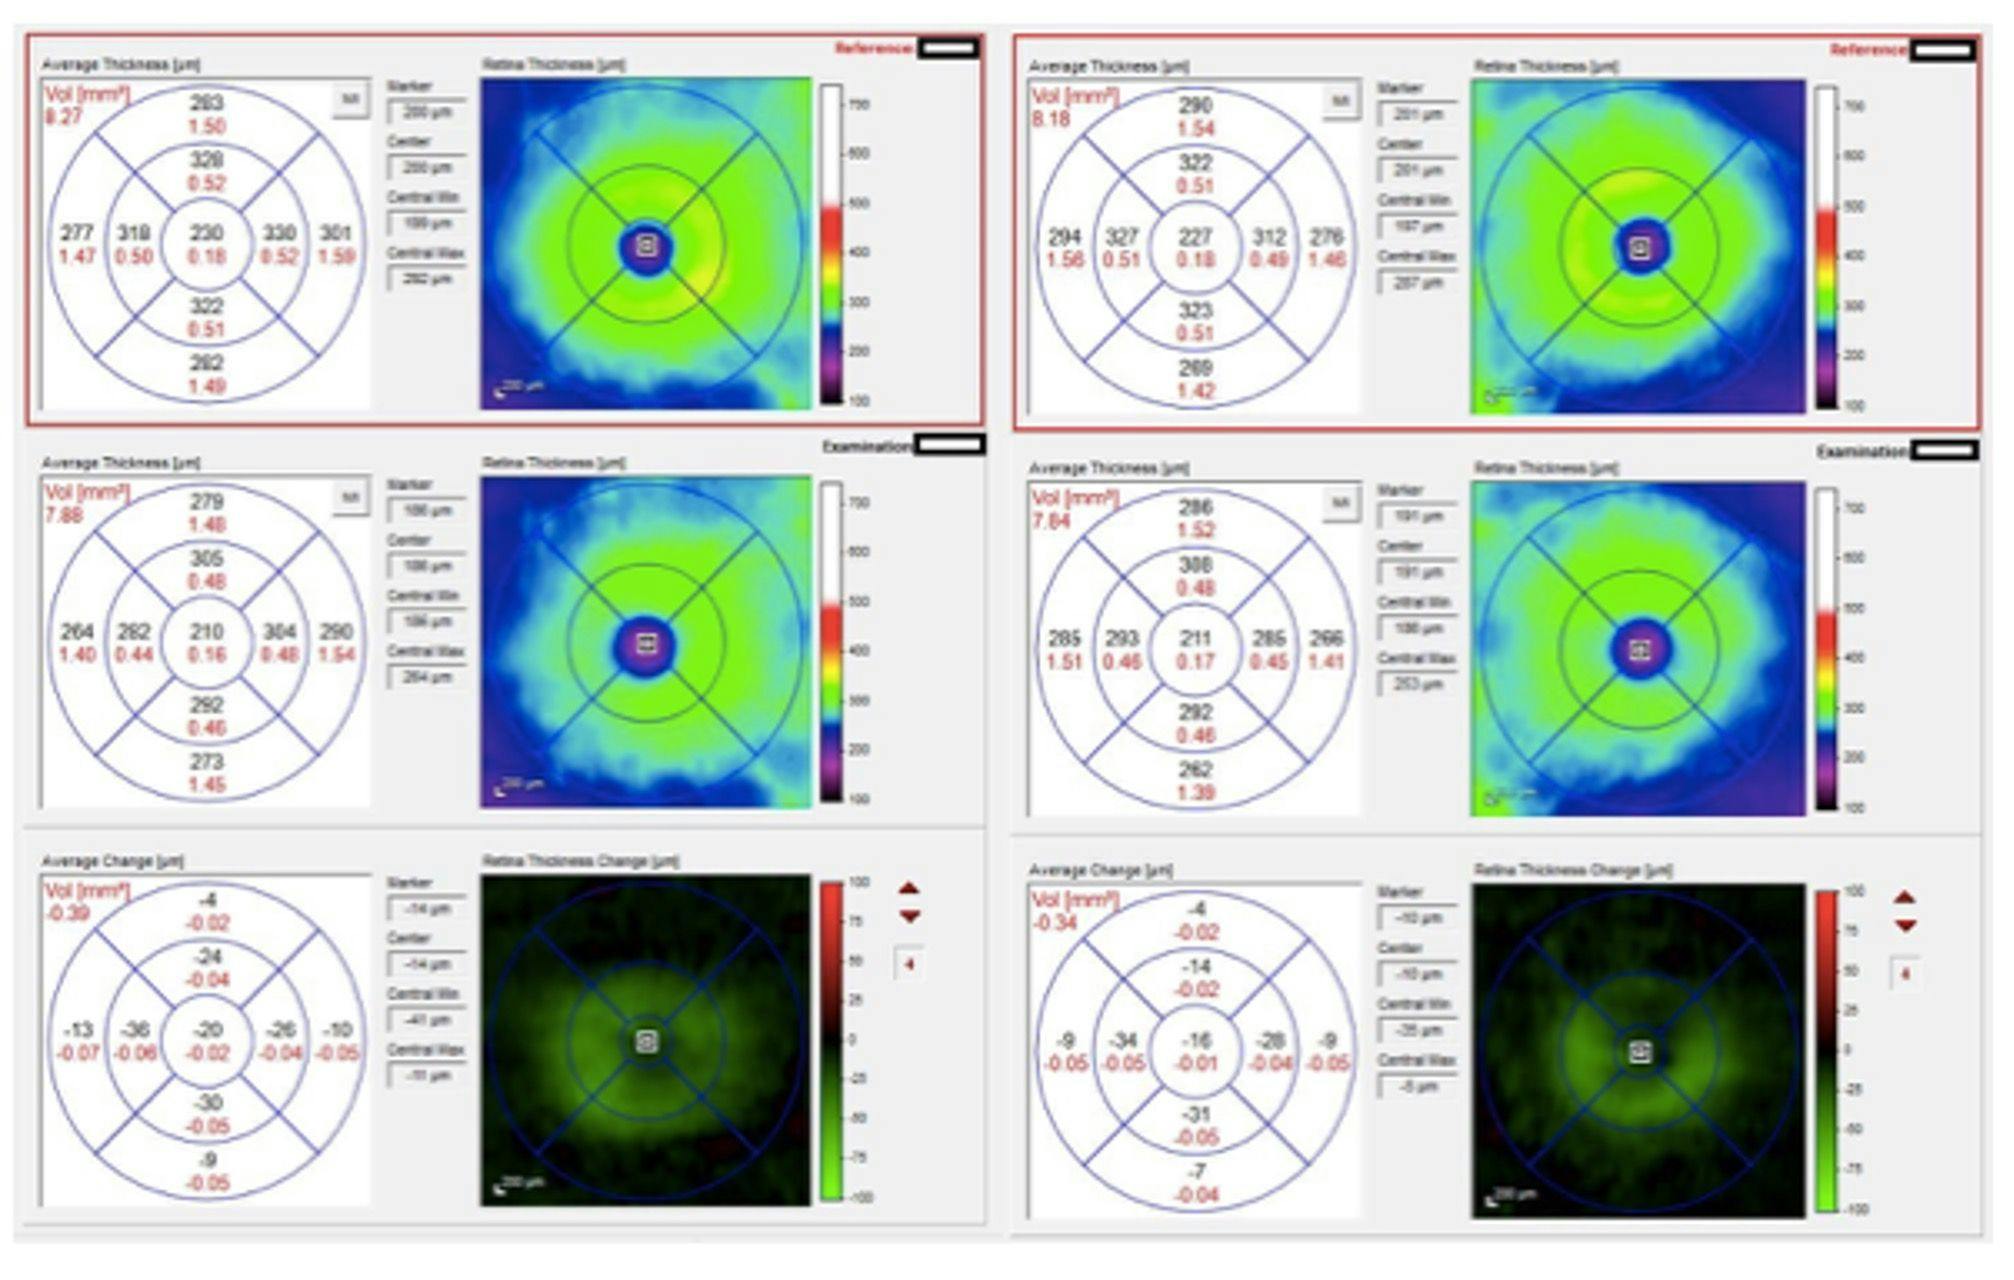 Figure 9. Thickness map of both eyes comparing baseline to follow-up testing and showing change over time. Especially in the inner ETDRS measurement circle, rapid thinning can be seen in both eyes. (All images courtesy of Kyra Dorgeloh, OD, FAAO.)